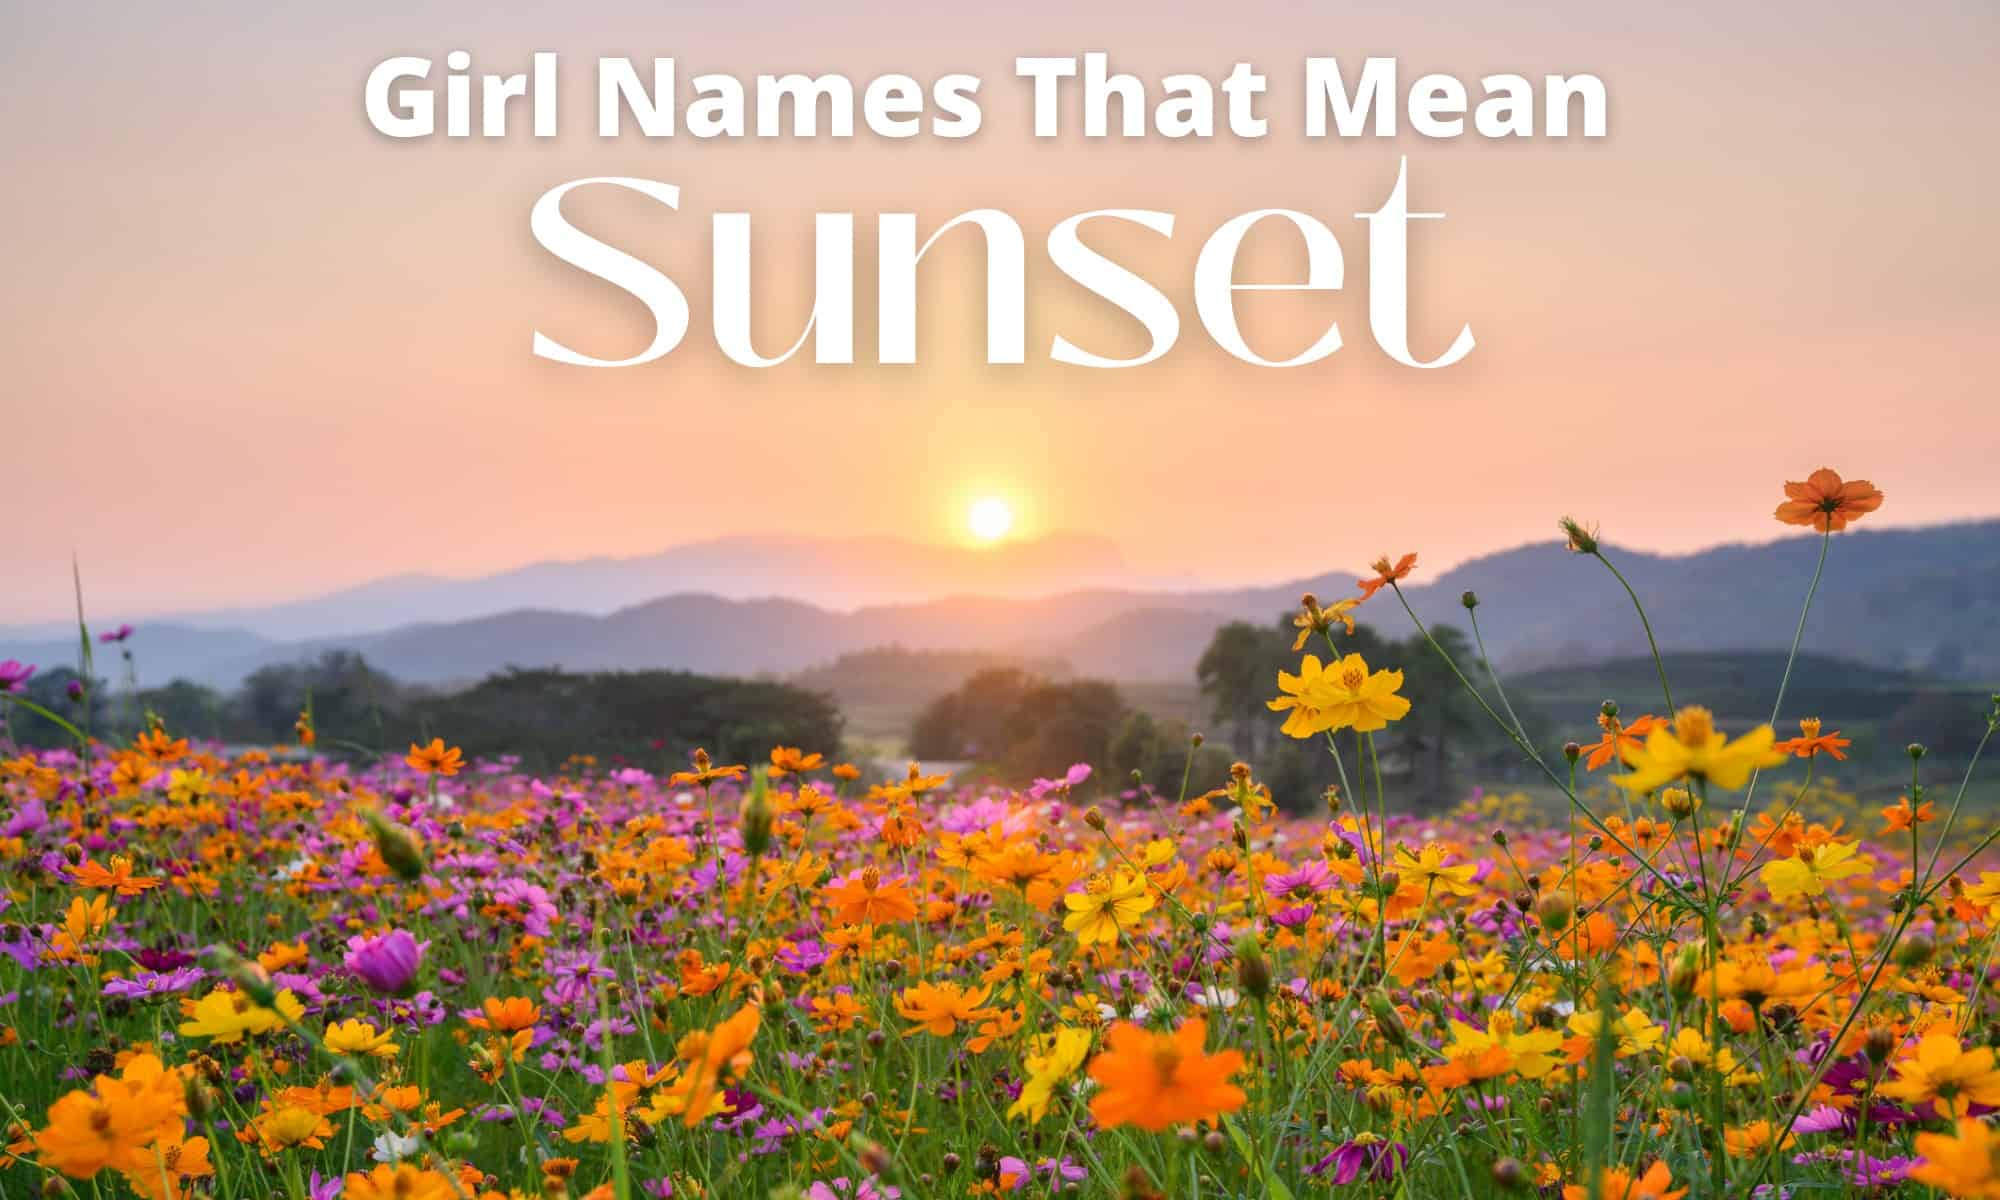 Girl Names That Mean Sunset